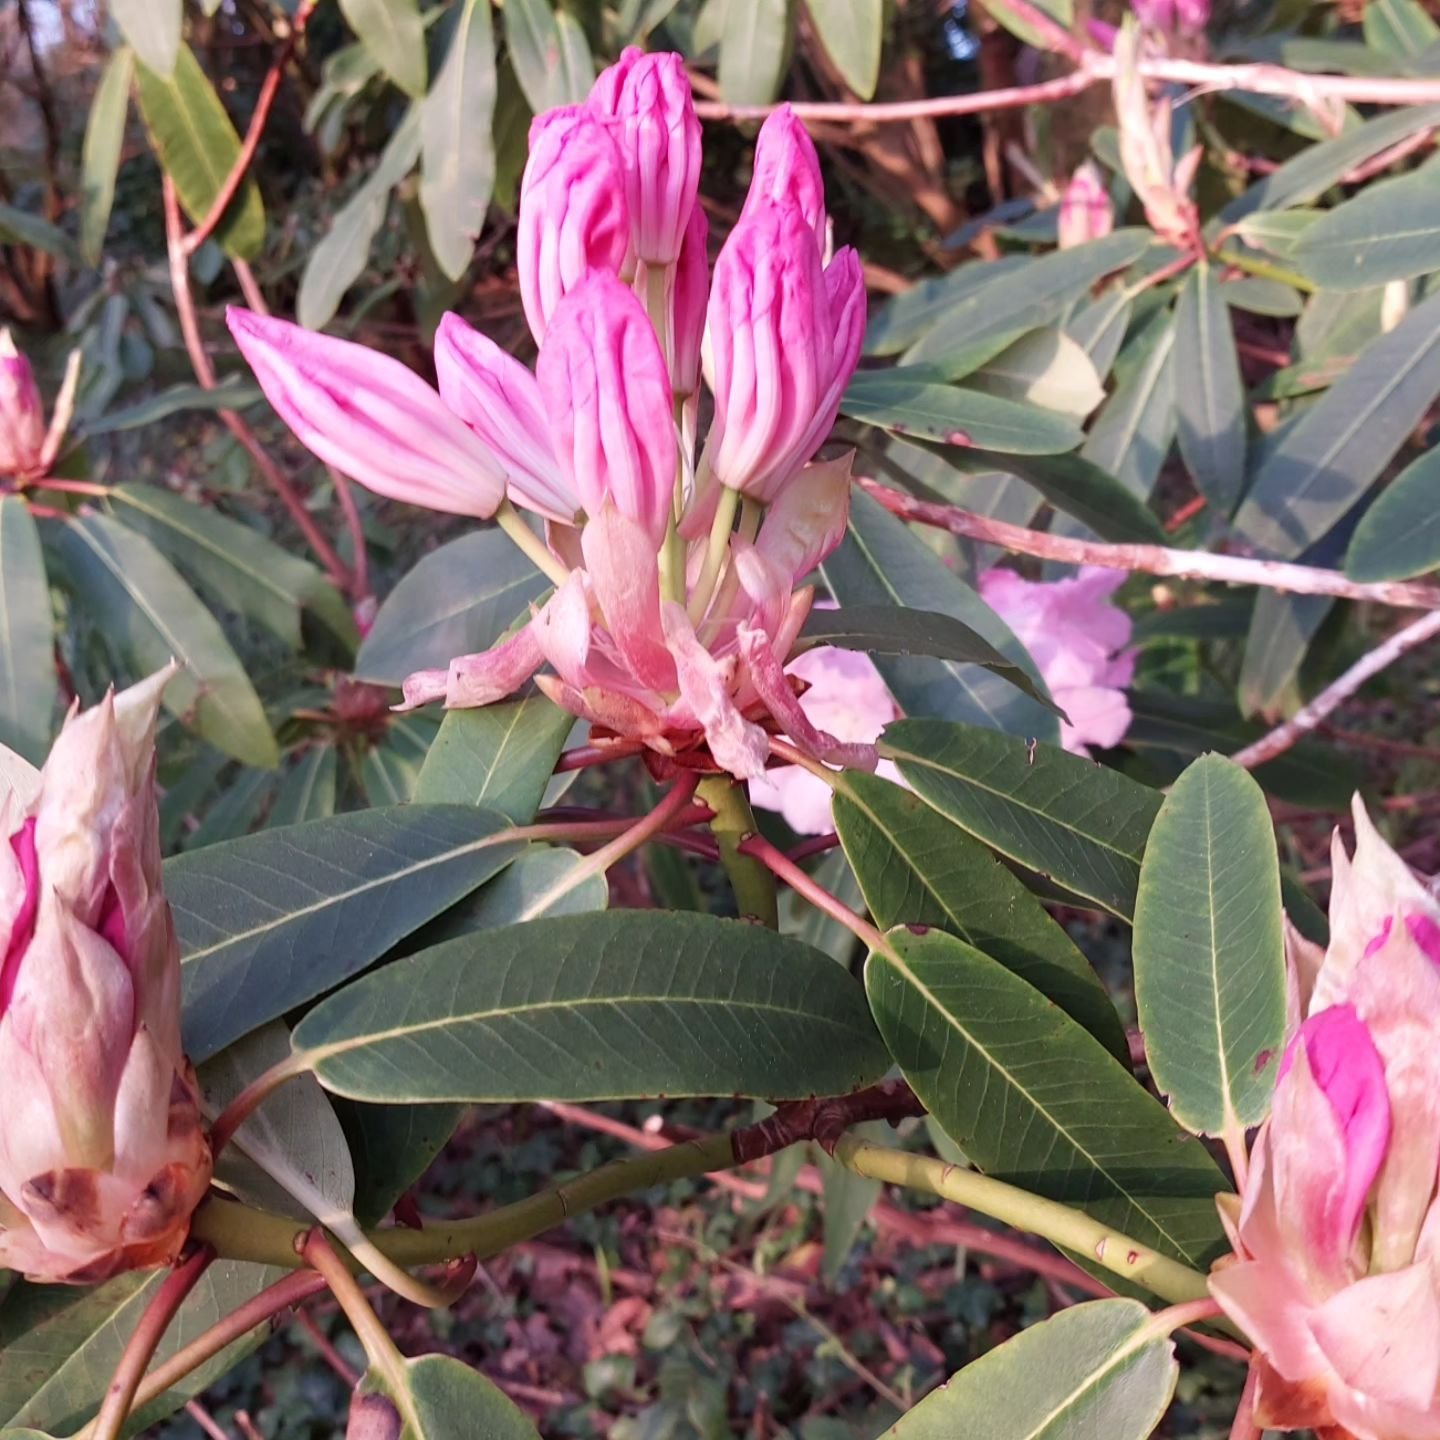 Scented Loderi rhododendrons coming into bloom in the spring sunshine. I love how the colours change as the flowers open. Lukesland is open on Suns,  Weds and Bank Hols 11am - 5pm till 9th June. Full details at www.lukesland.co.uk 

#devongardens #de